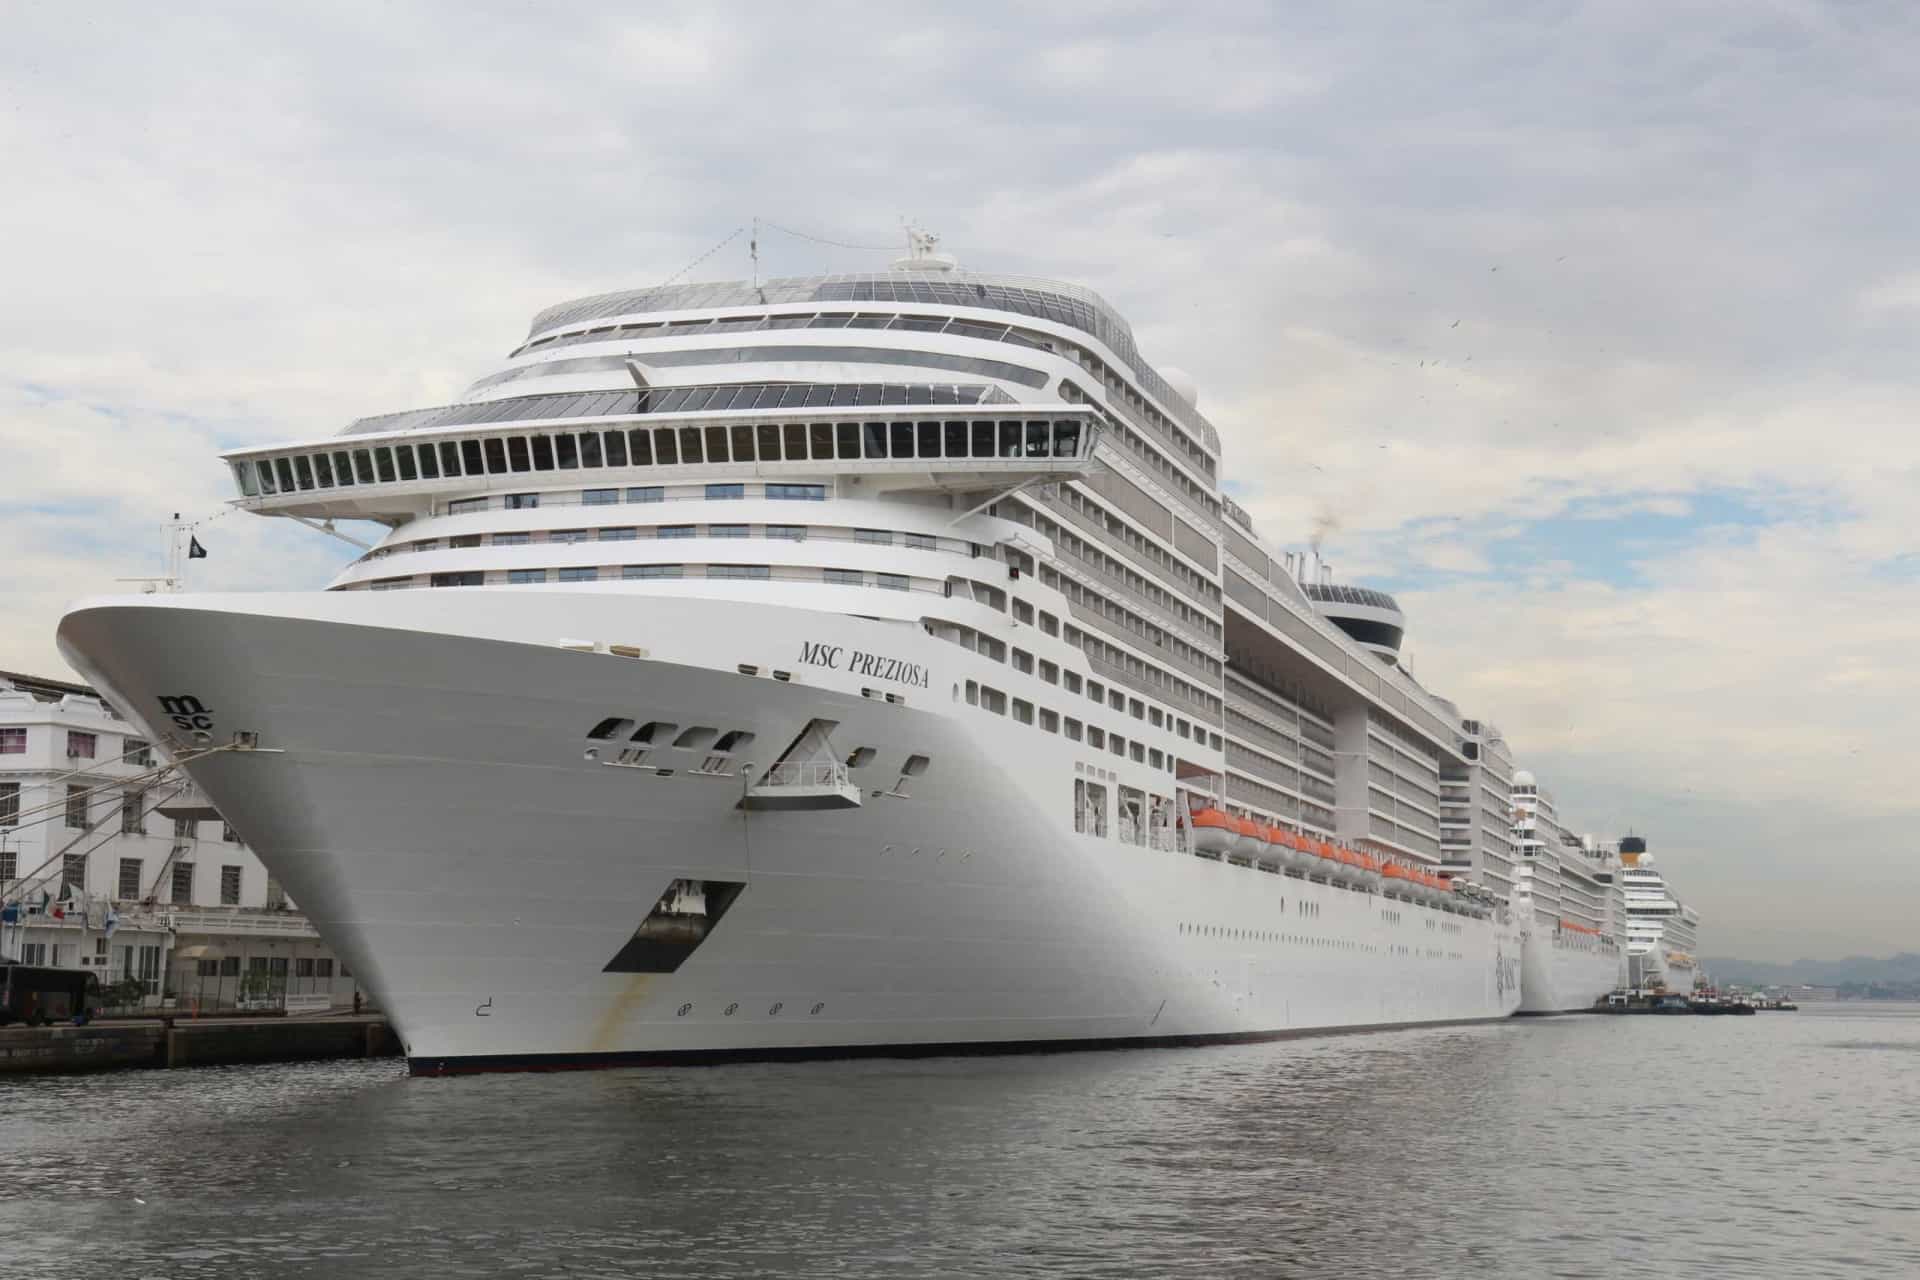 <p>A Dutch woman, who isn't being named, went overboard the MSC Preziosa near Martinique on December 8, 2018, and hasn't been found. Crew members didn't know she'd gone overboard until docking.</p>